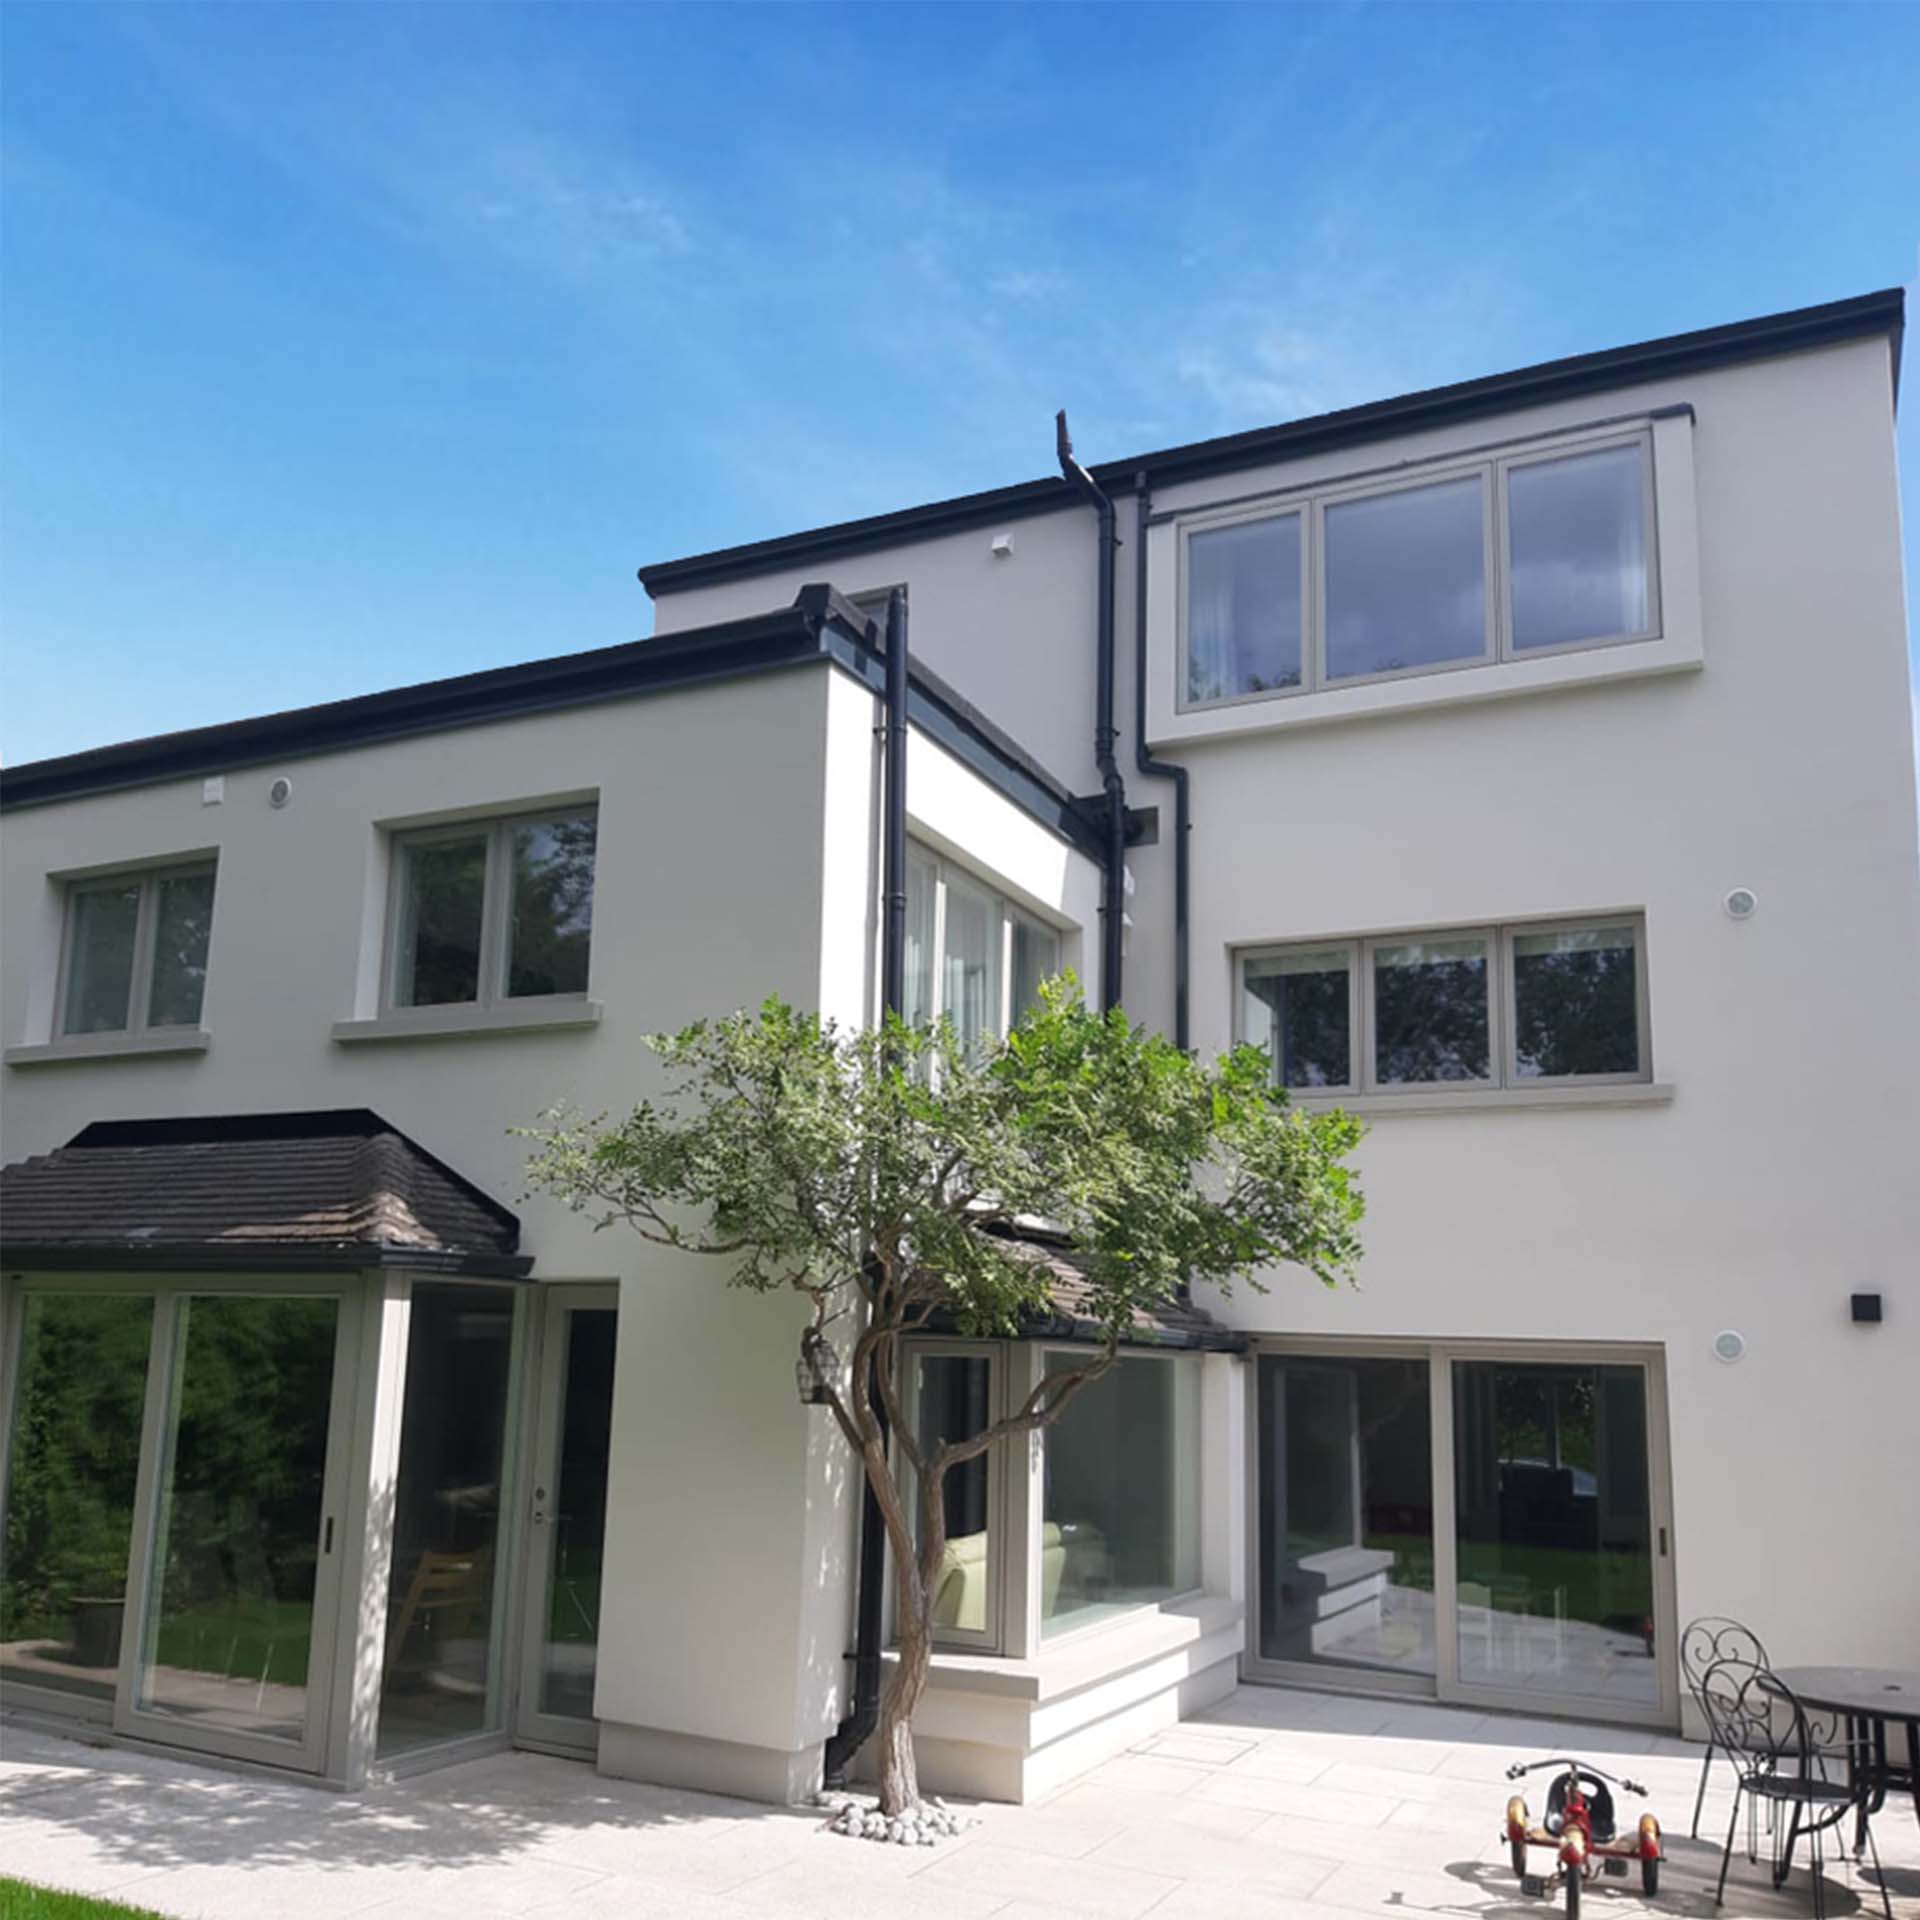 A beautiful home with external wall insulation.